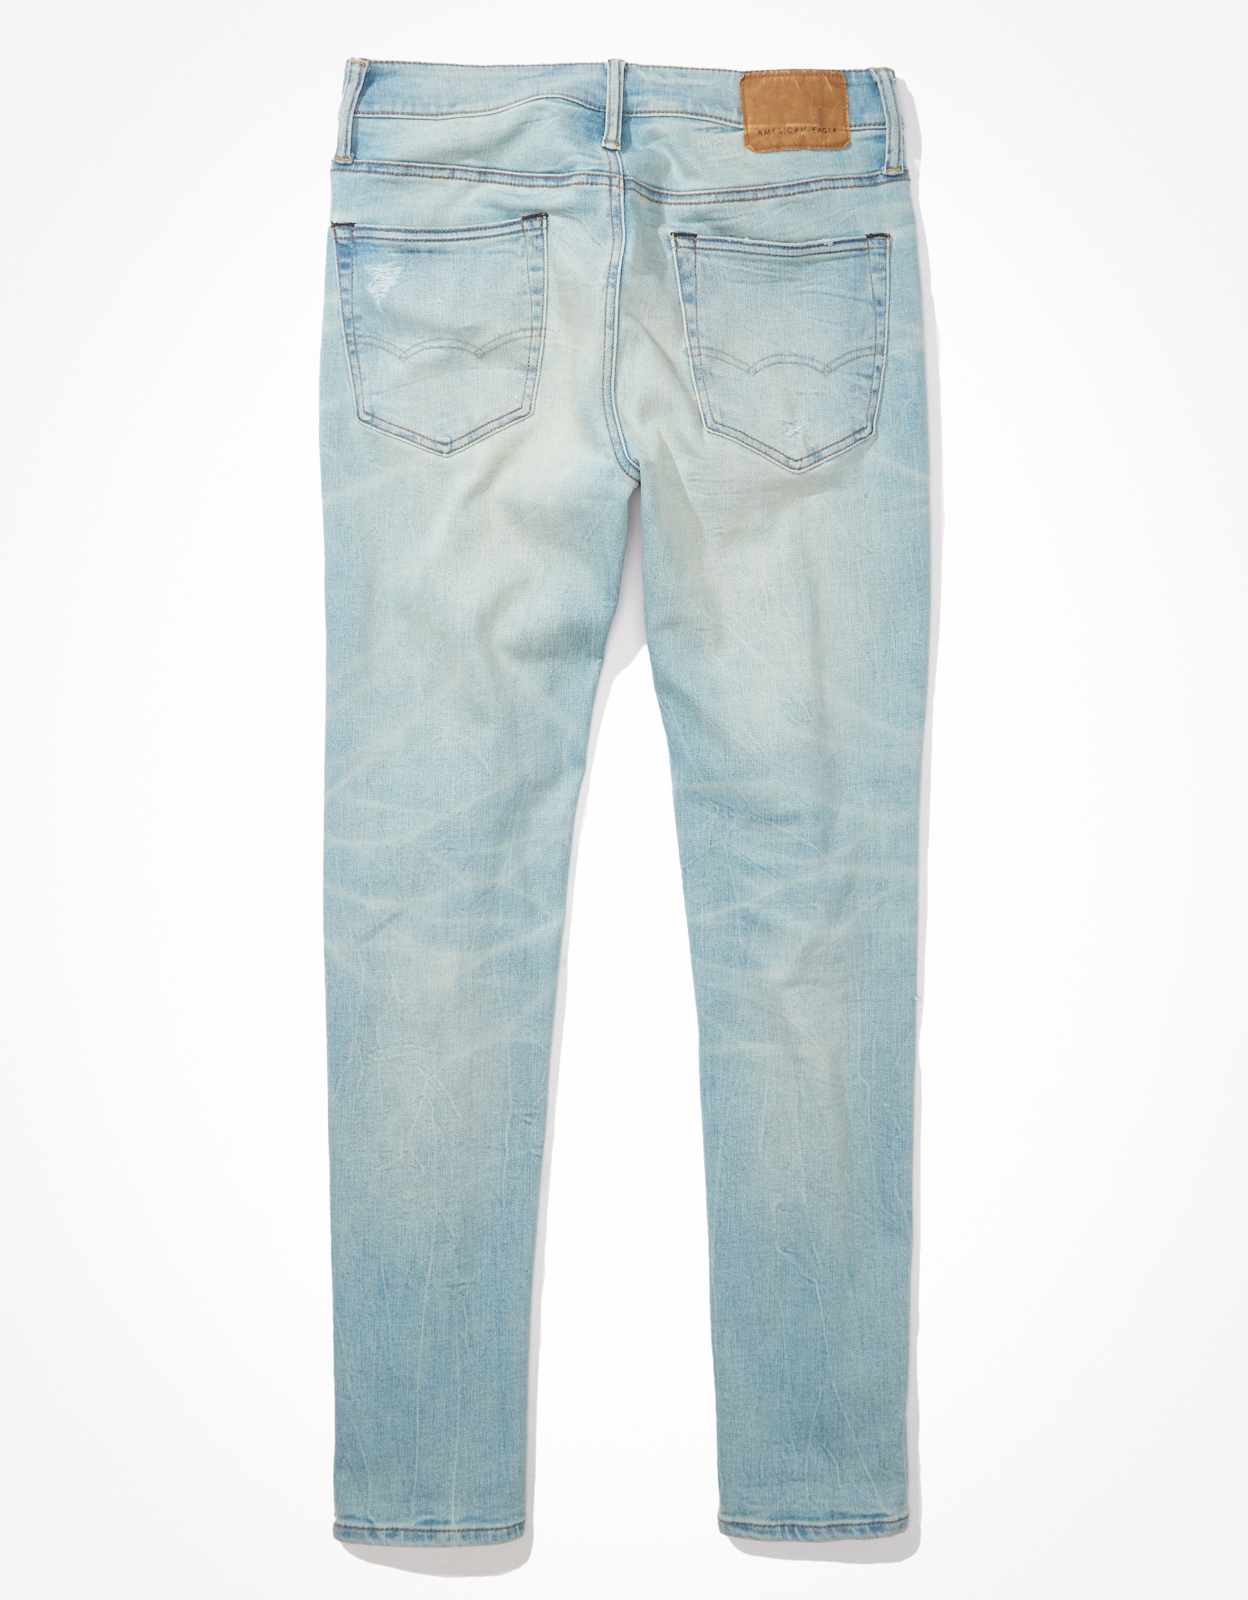 American eagle AirFlex+ Temp Tech Patched Skinny Long Jean Blue